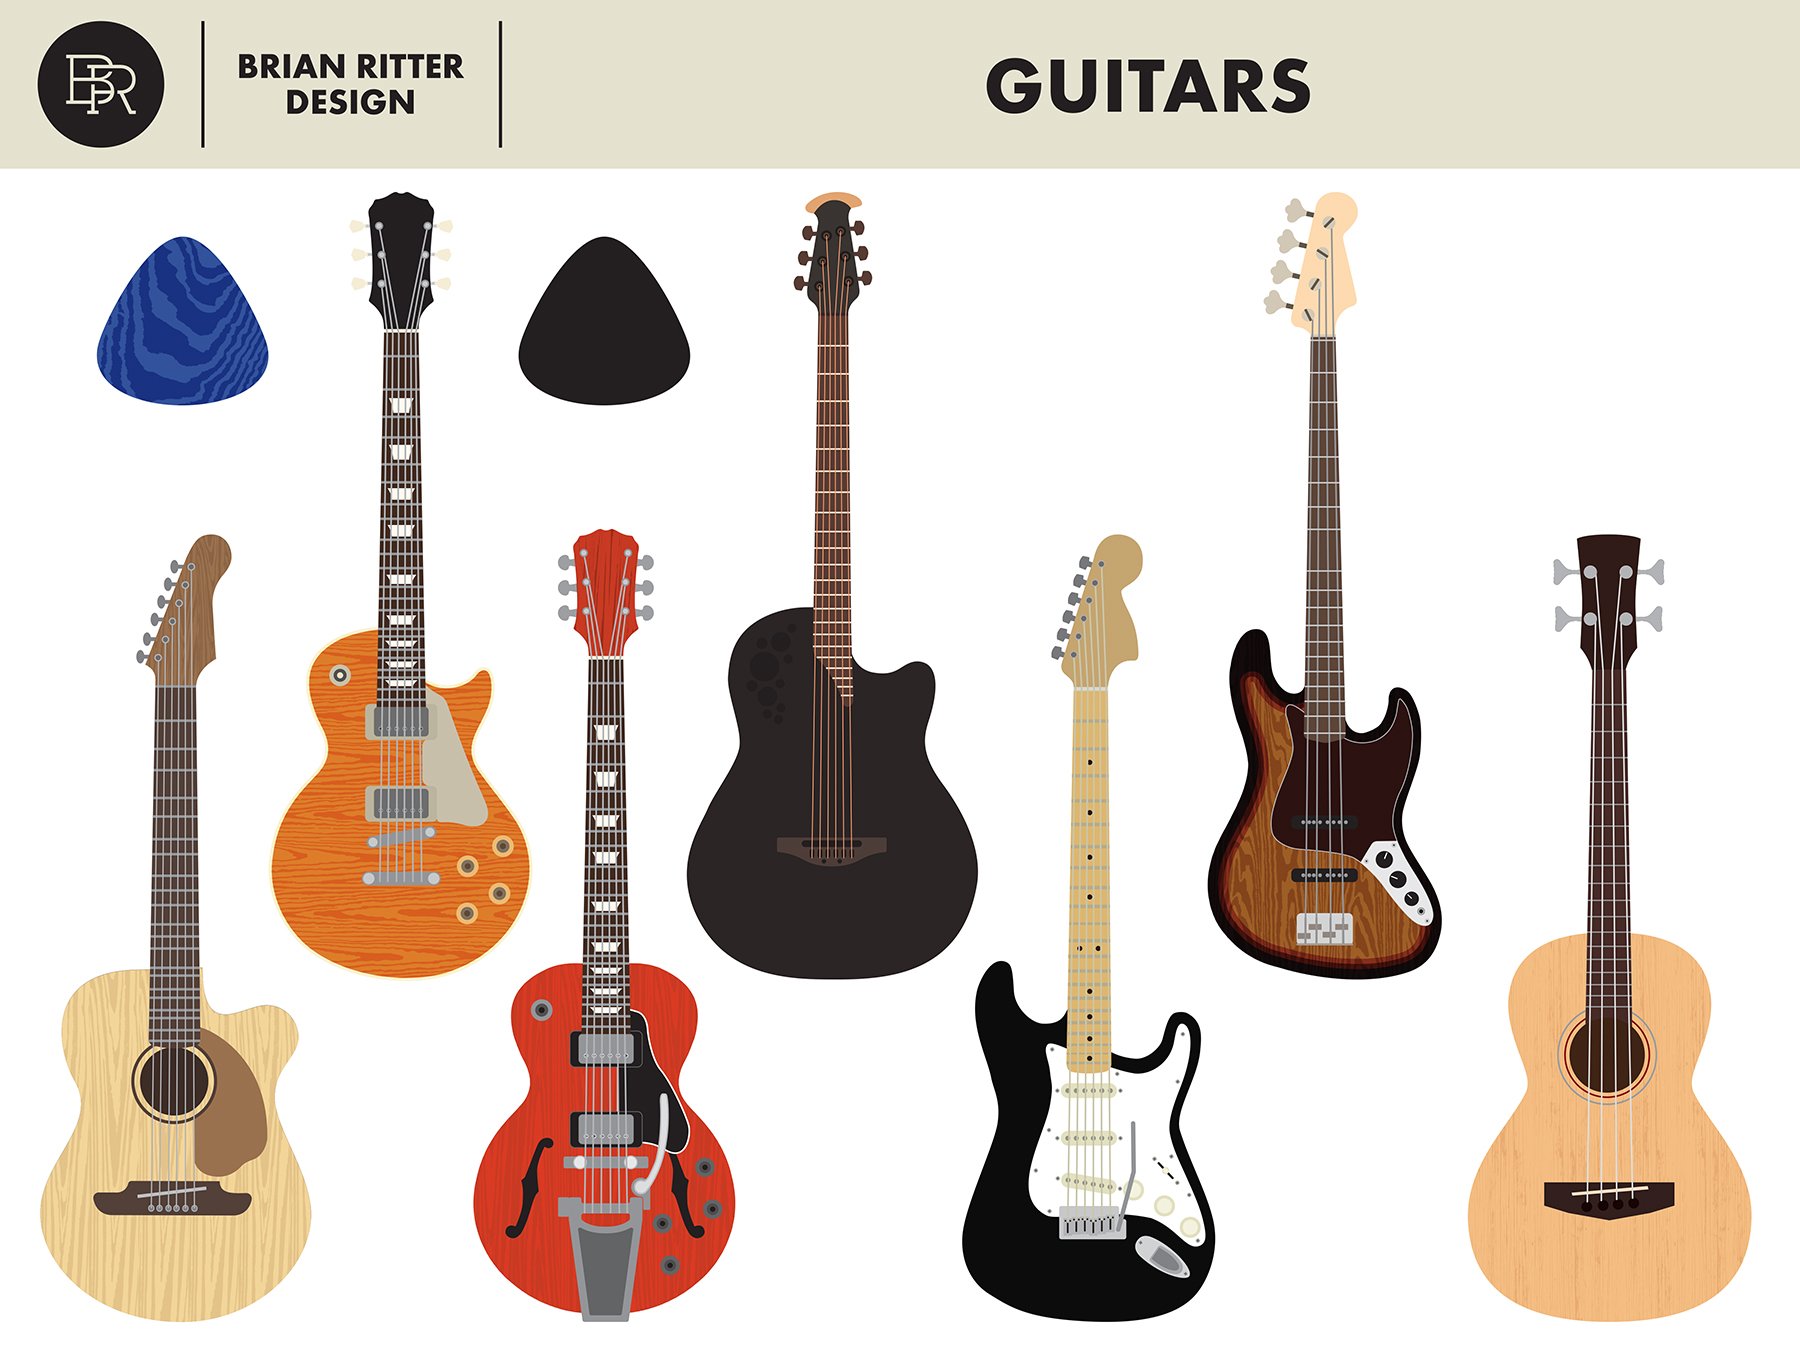 Cool guitars collection.